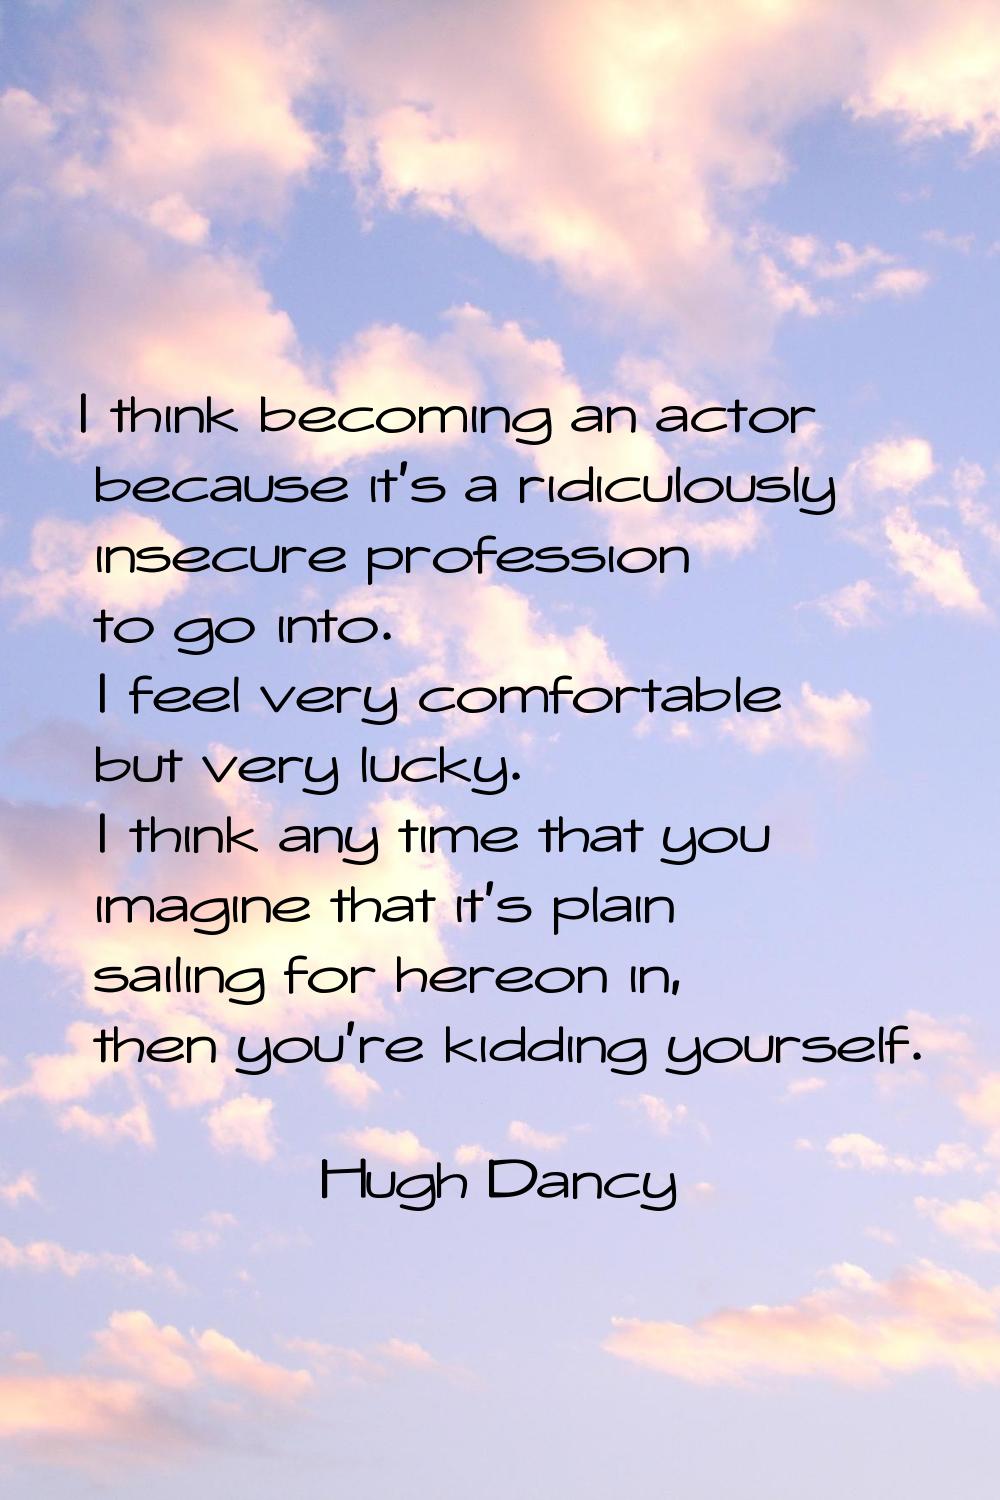 I think becoming an actor because it's a ridiculously insecure profession to go into. I feel very c